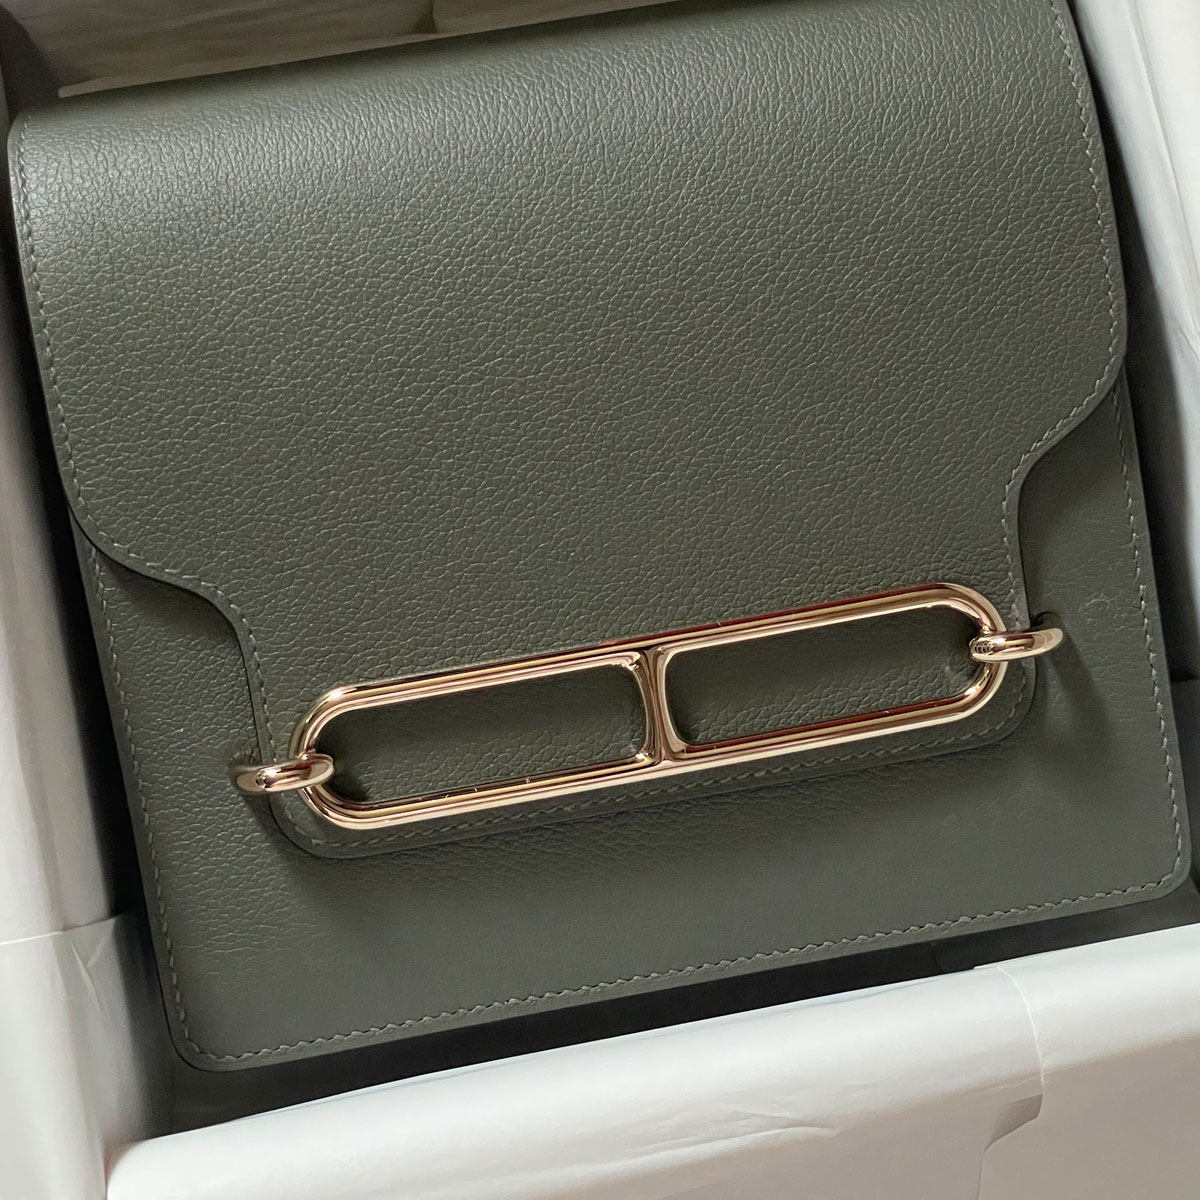 Hermes Mini Roulis in Gris Meyer in permabrass hardware